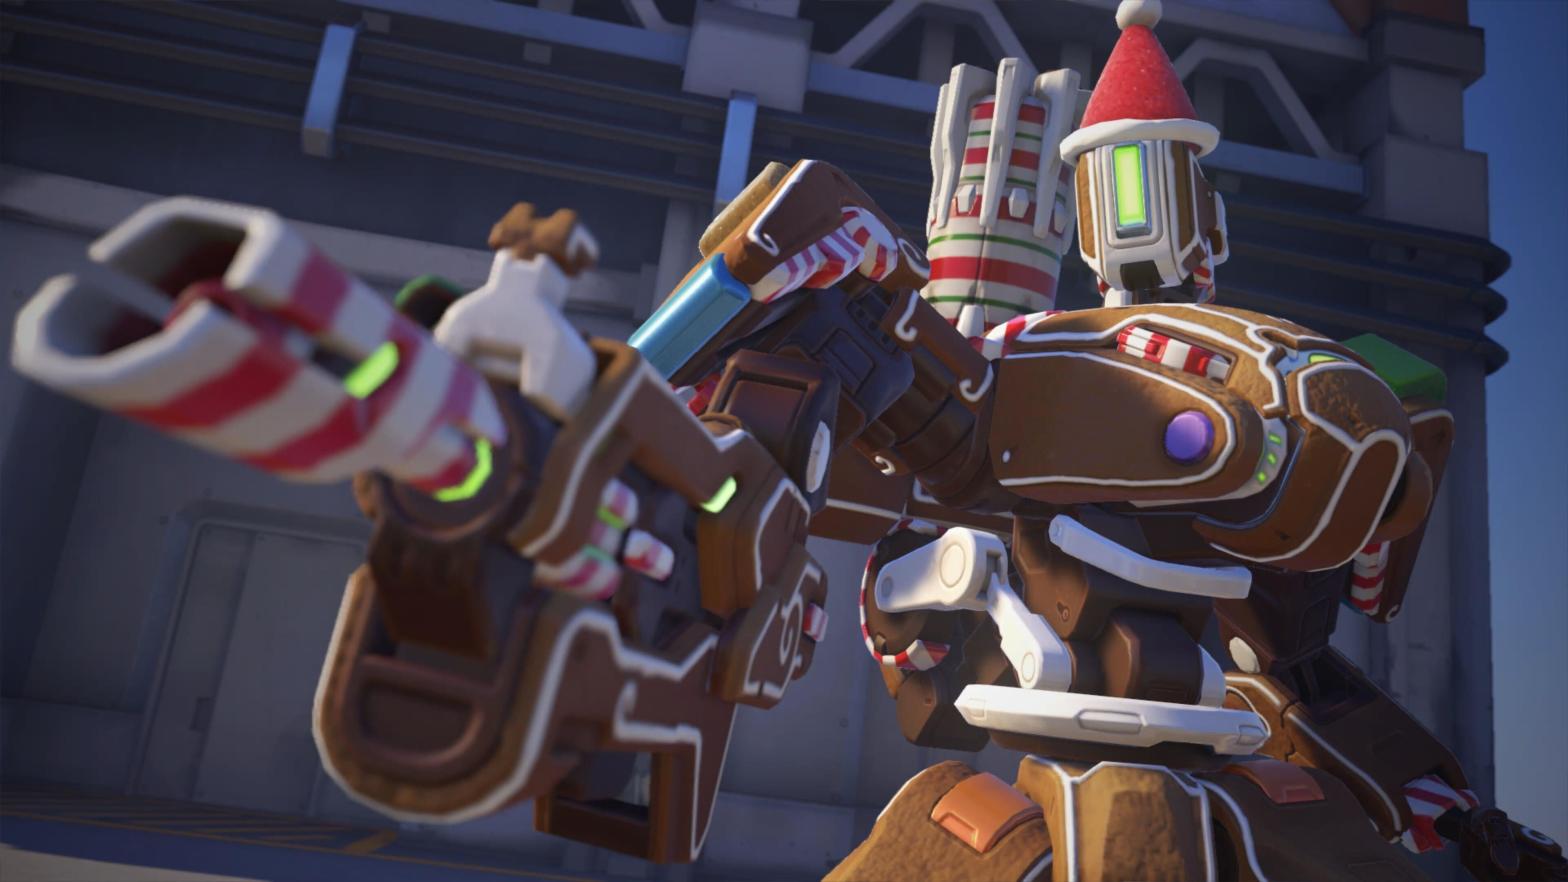 The Gingerbread Bastion skin is available for one coin on the Overwatch 2 store, and your coin balance will l remind you of it until the end of days. (Screenshot: Blizzard Entertainment/Kotaku)